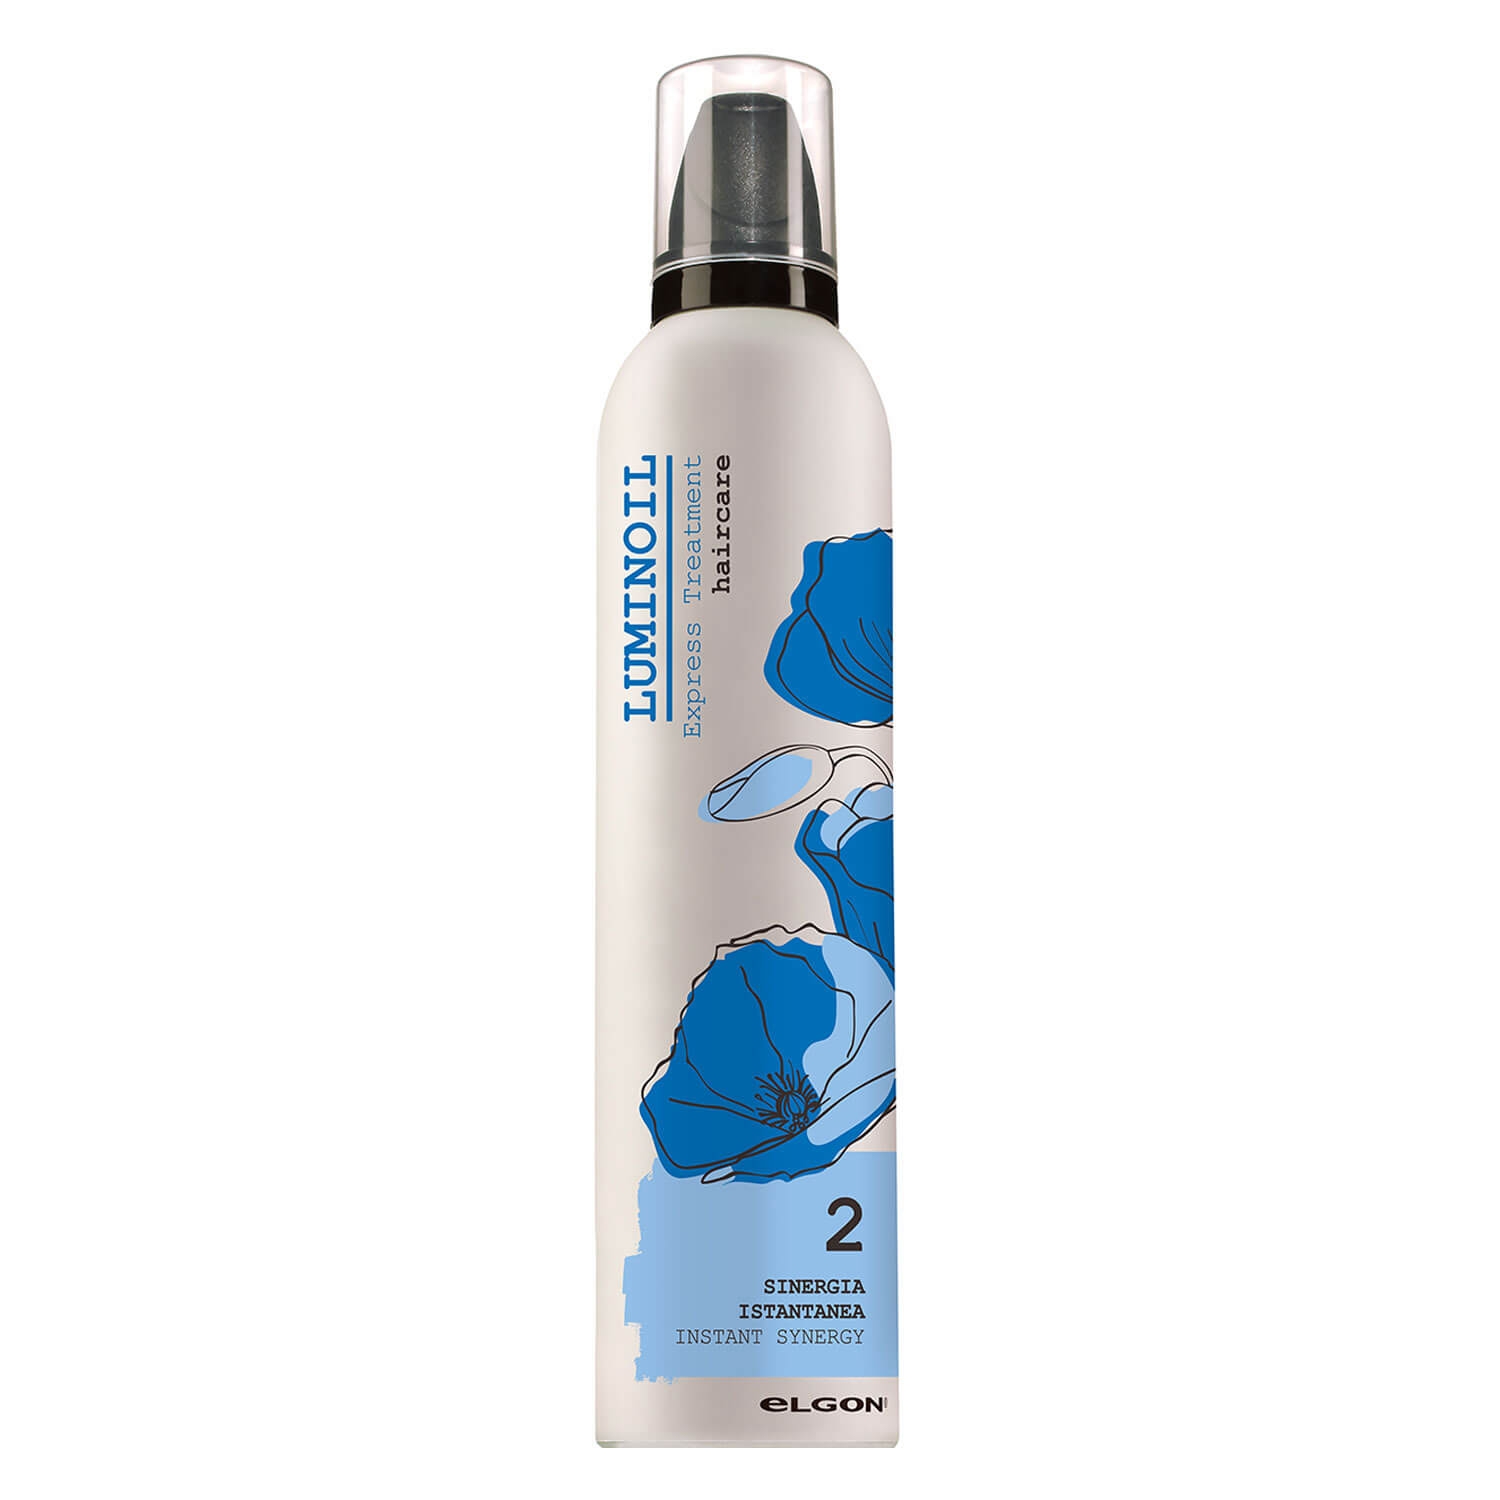 Product image from Luminoil - Instant Synergy